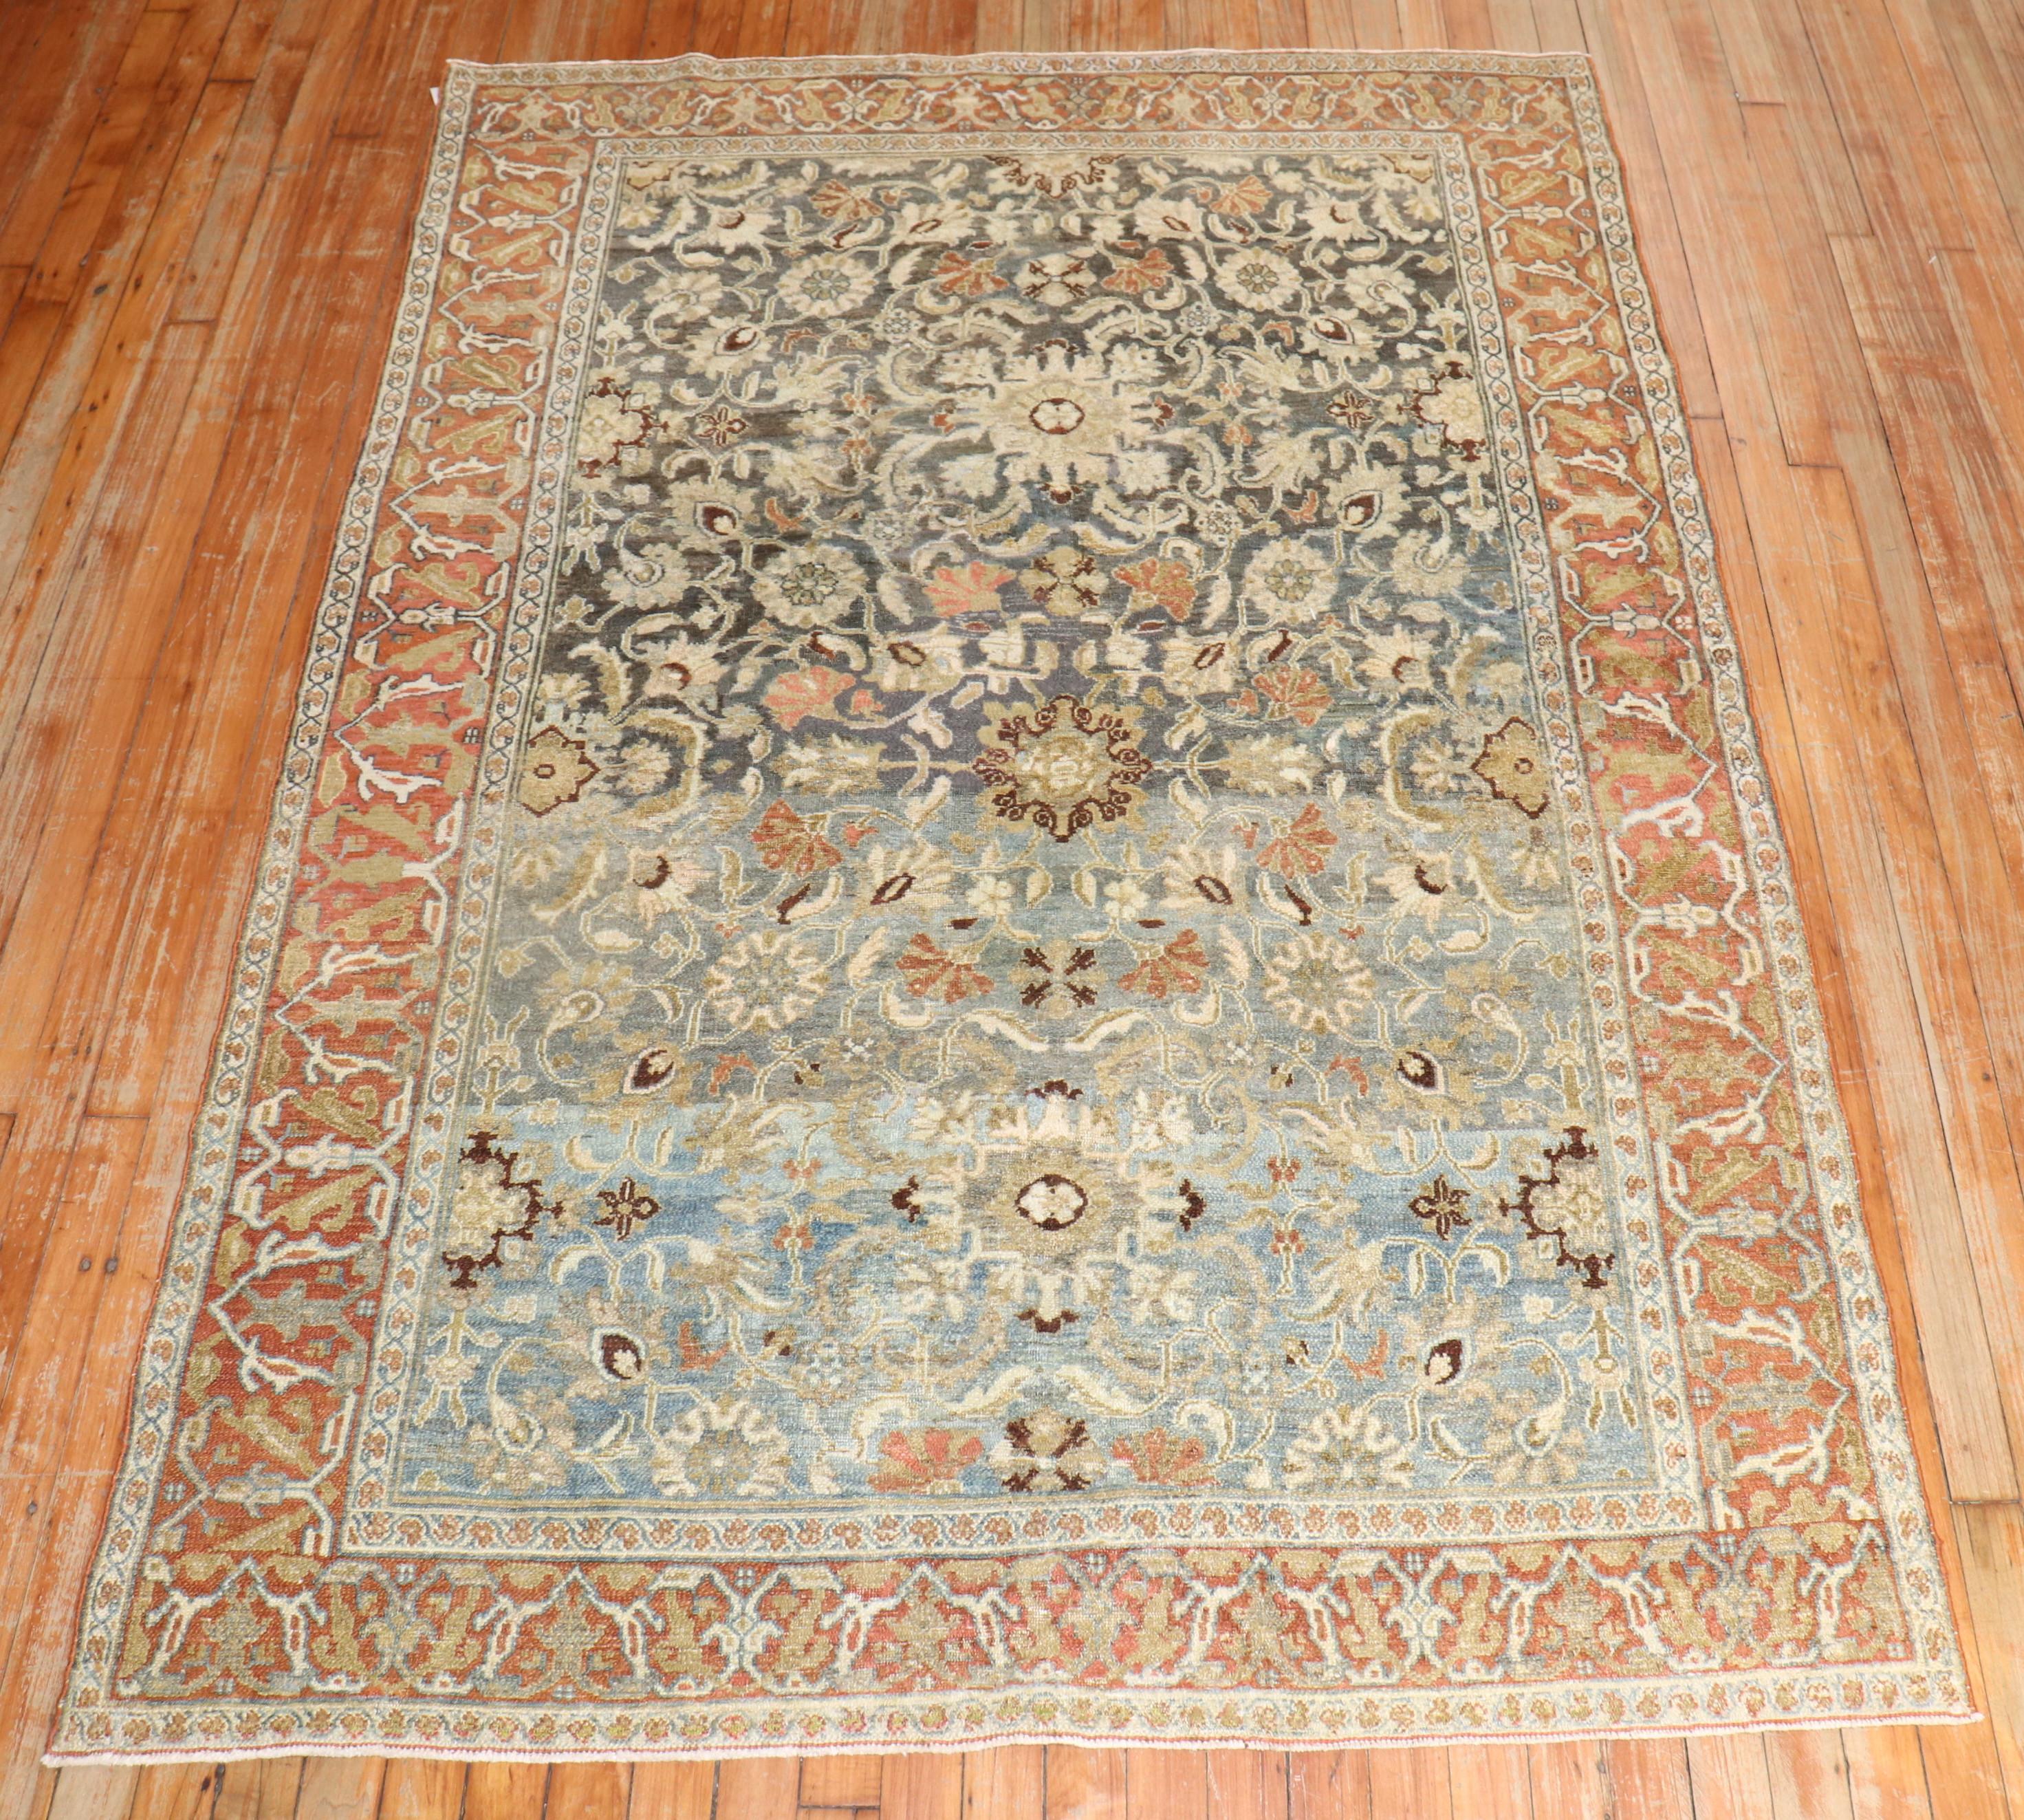 Spectacular antique Bibikabad Persian Senneh rug from the 1st quarter of the 20th Century

Measures: 4'7'' x 6'6''.